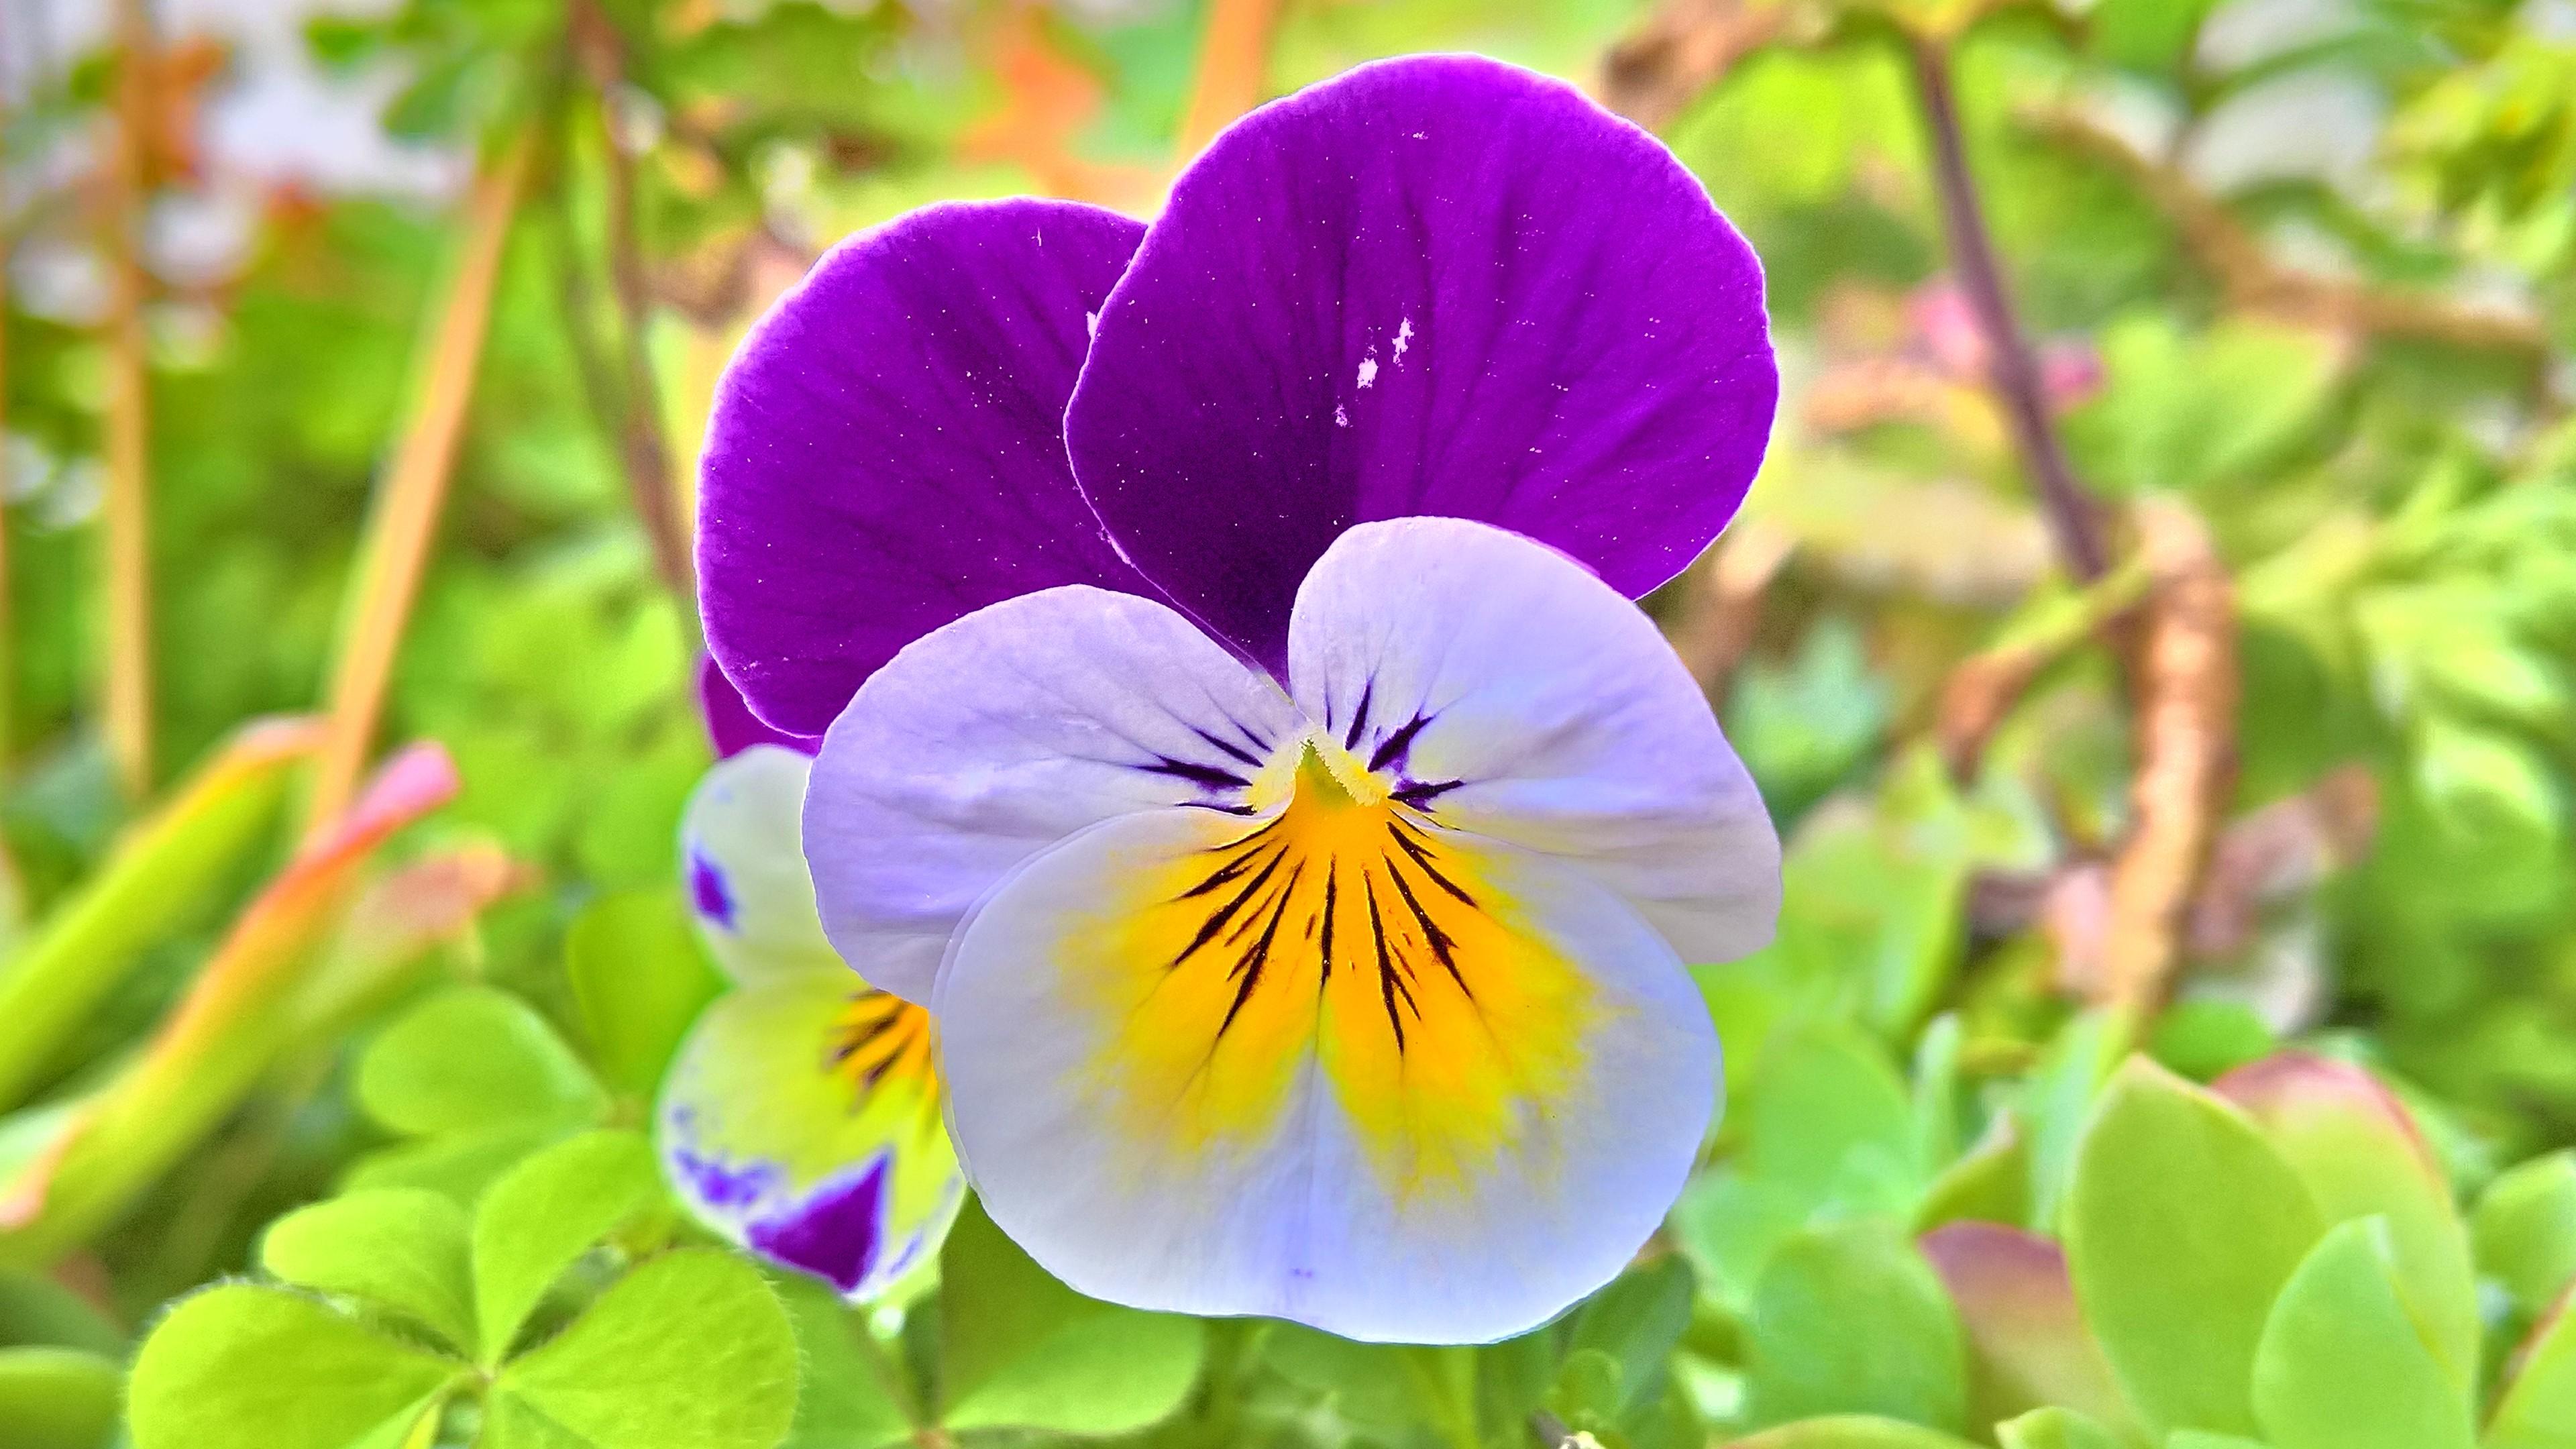 Earth Flower Pansy 3840x2160